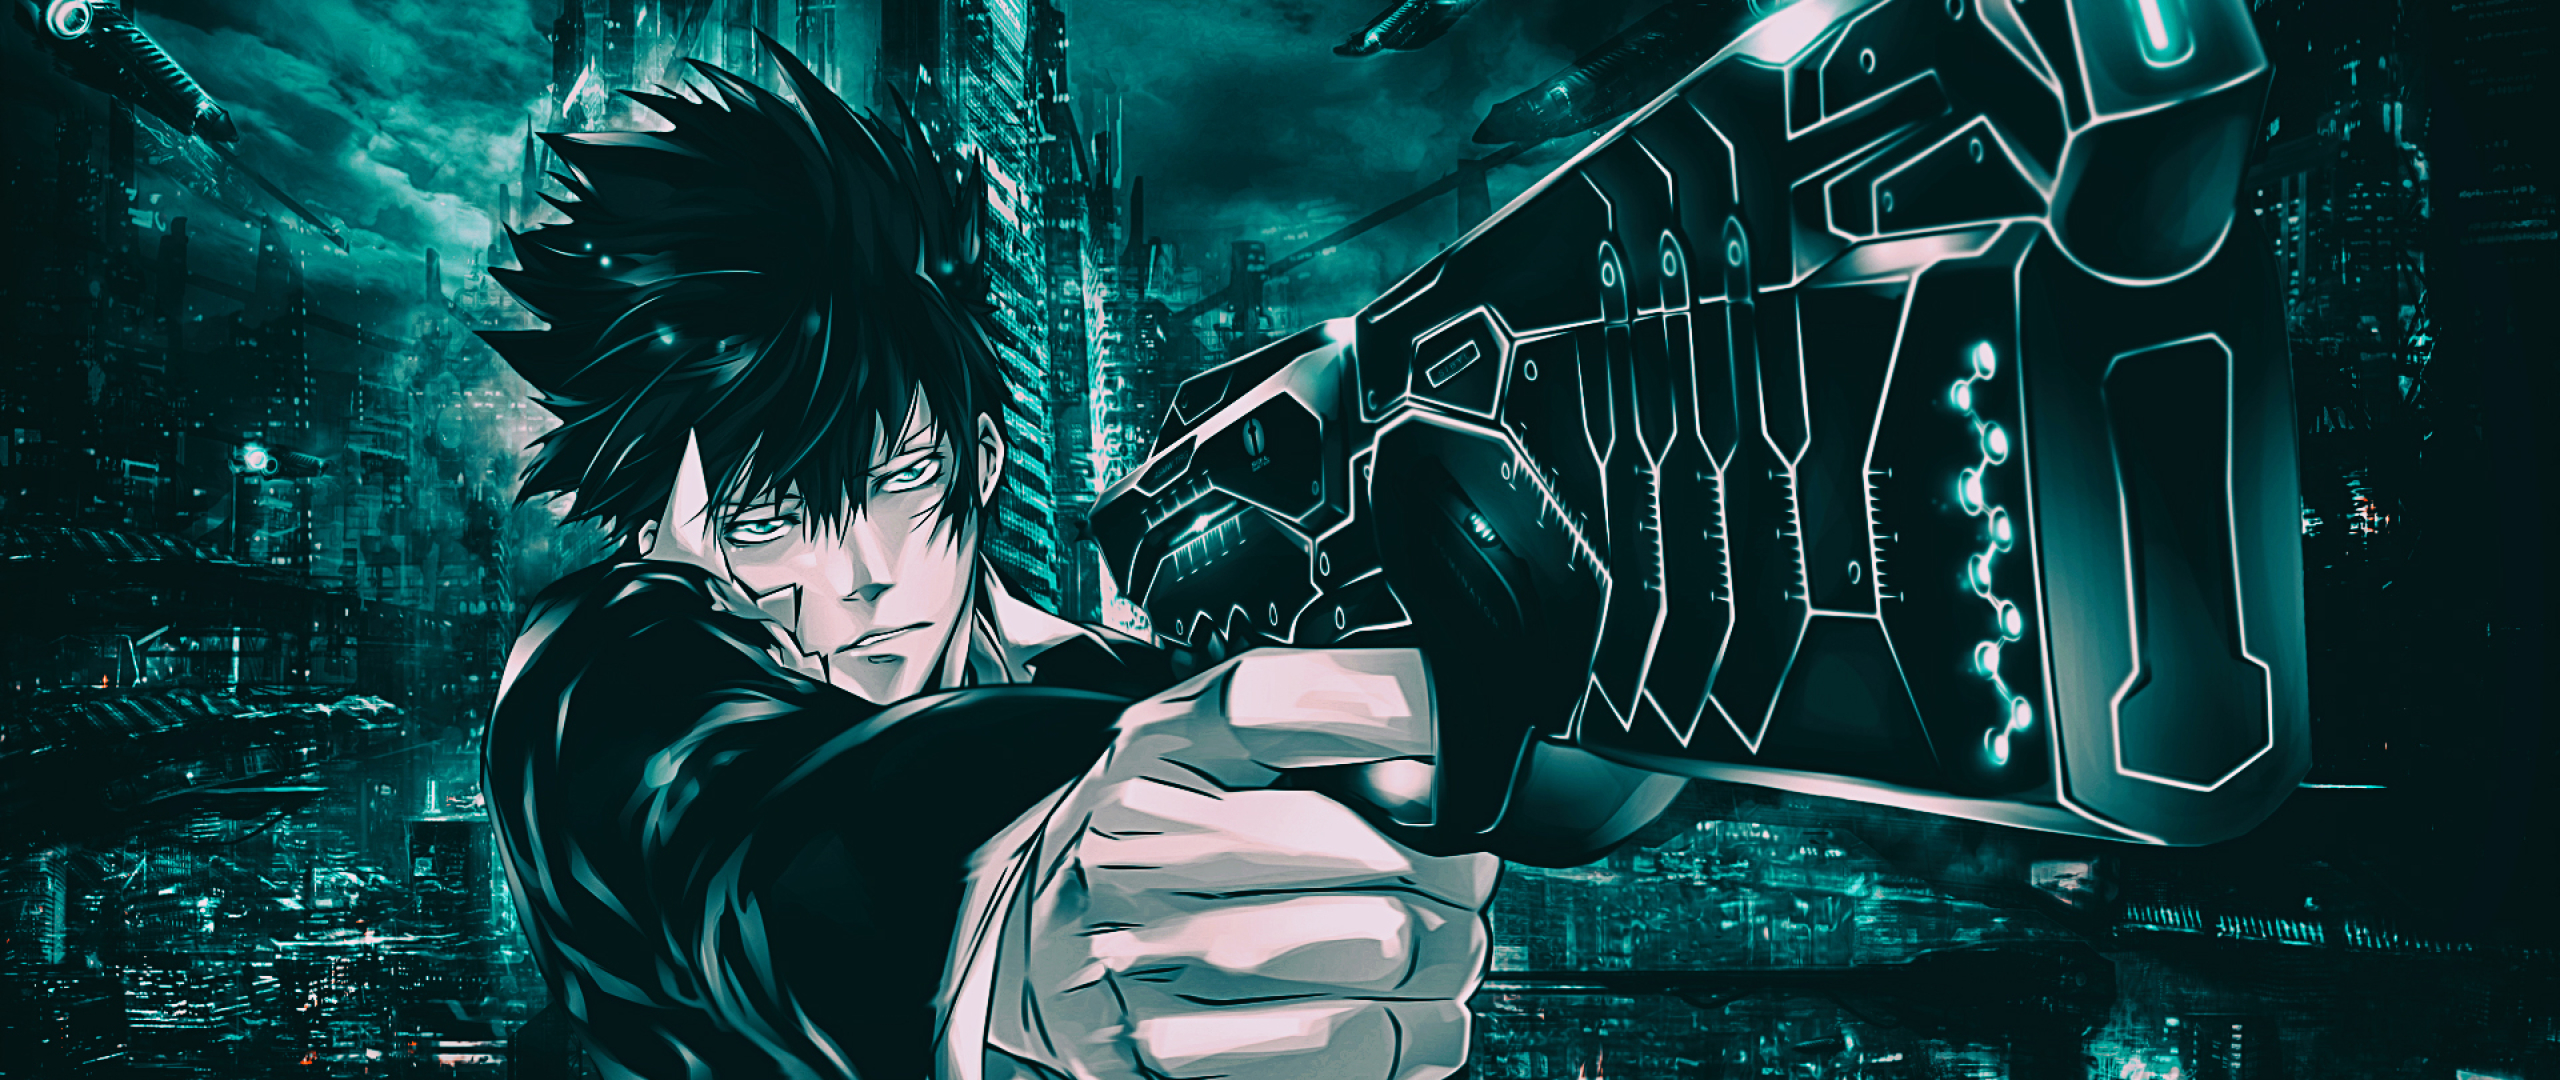 2560x1080 Shinya Kogami From Psycho Pass 2560x1080 Resolution Wallpaper Hd Anime 4k Wallpapers Images Photos And Background Wallpapers Den